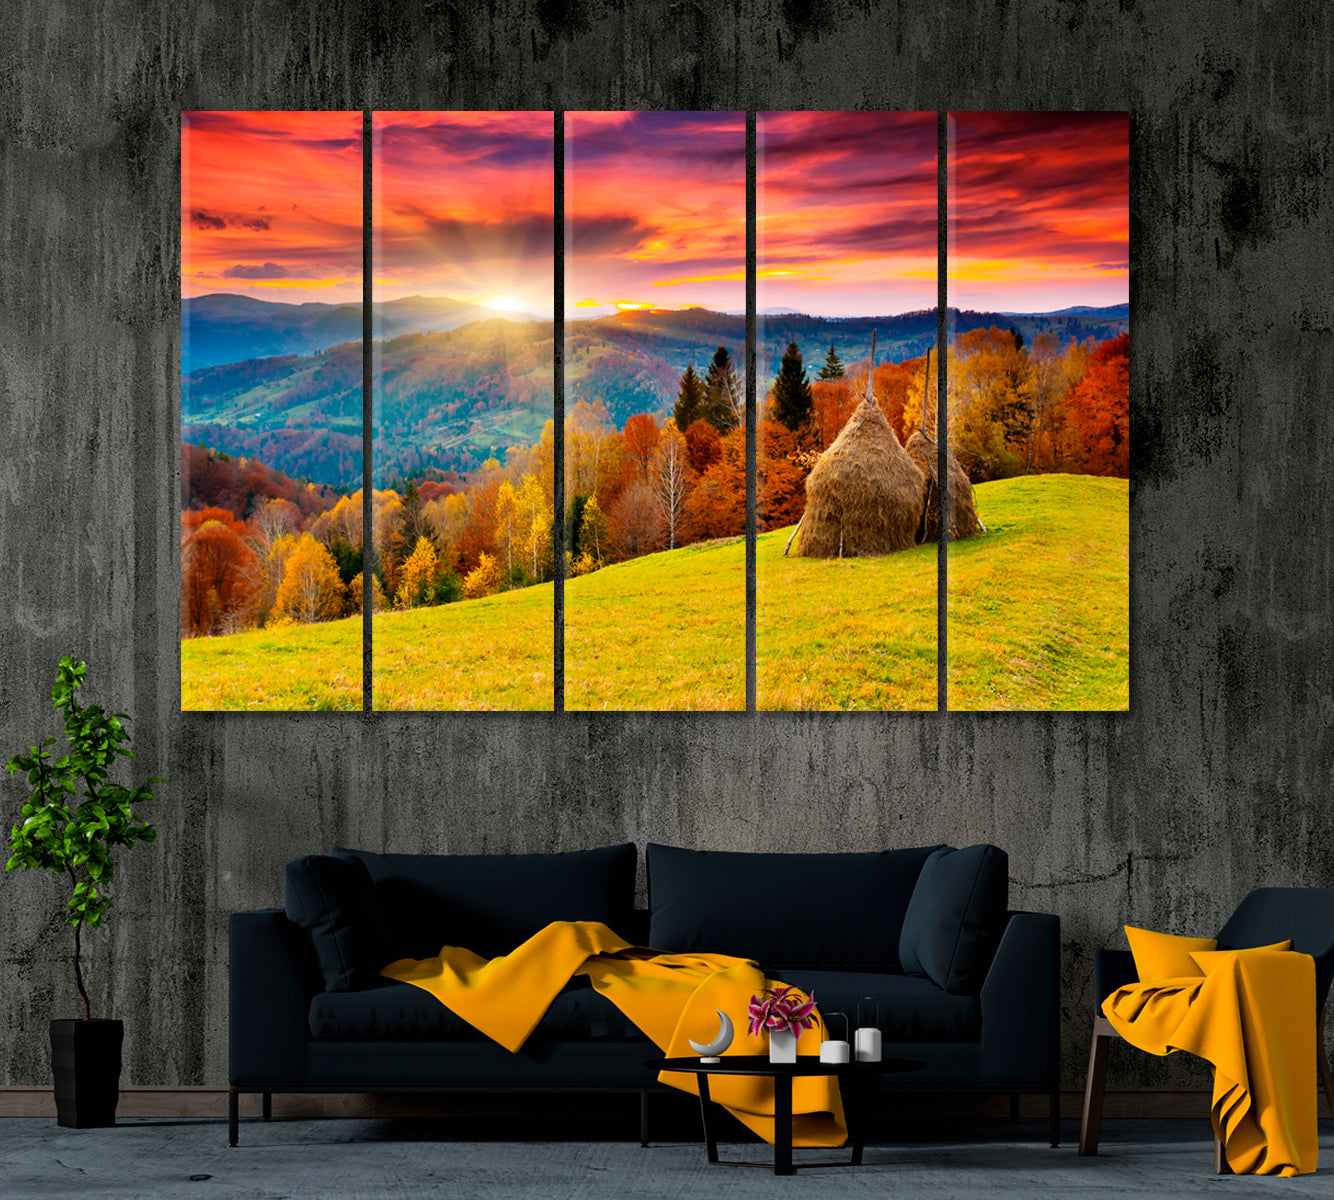 Autumn Carpathian Mountains Landscape with Colorful Forest Canvas Print ArtLexy 5 Panels 36"x24" inches 